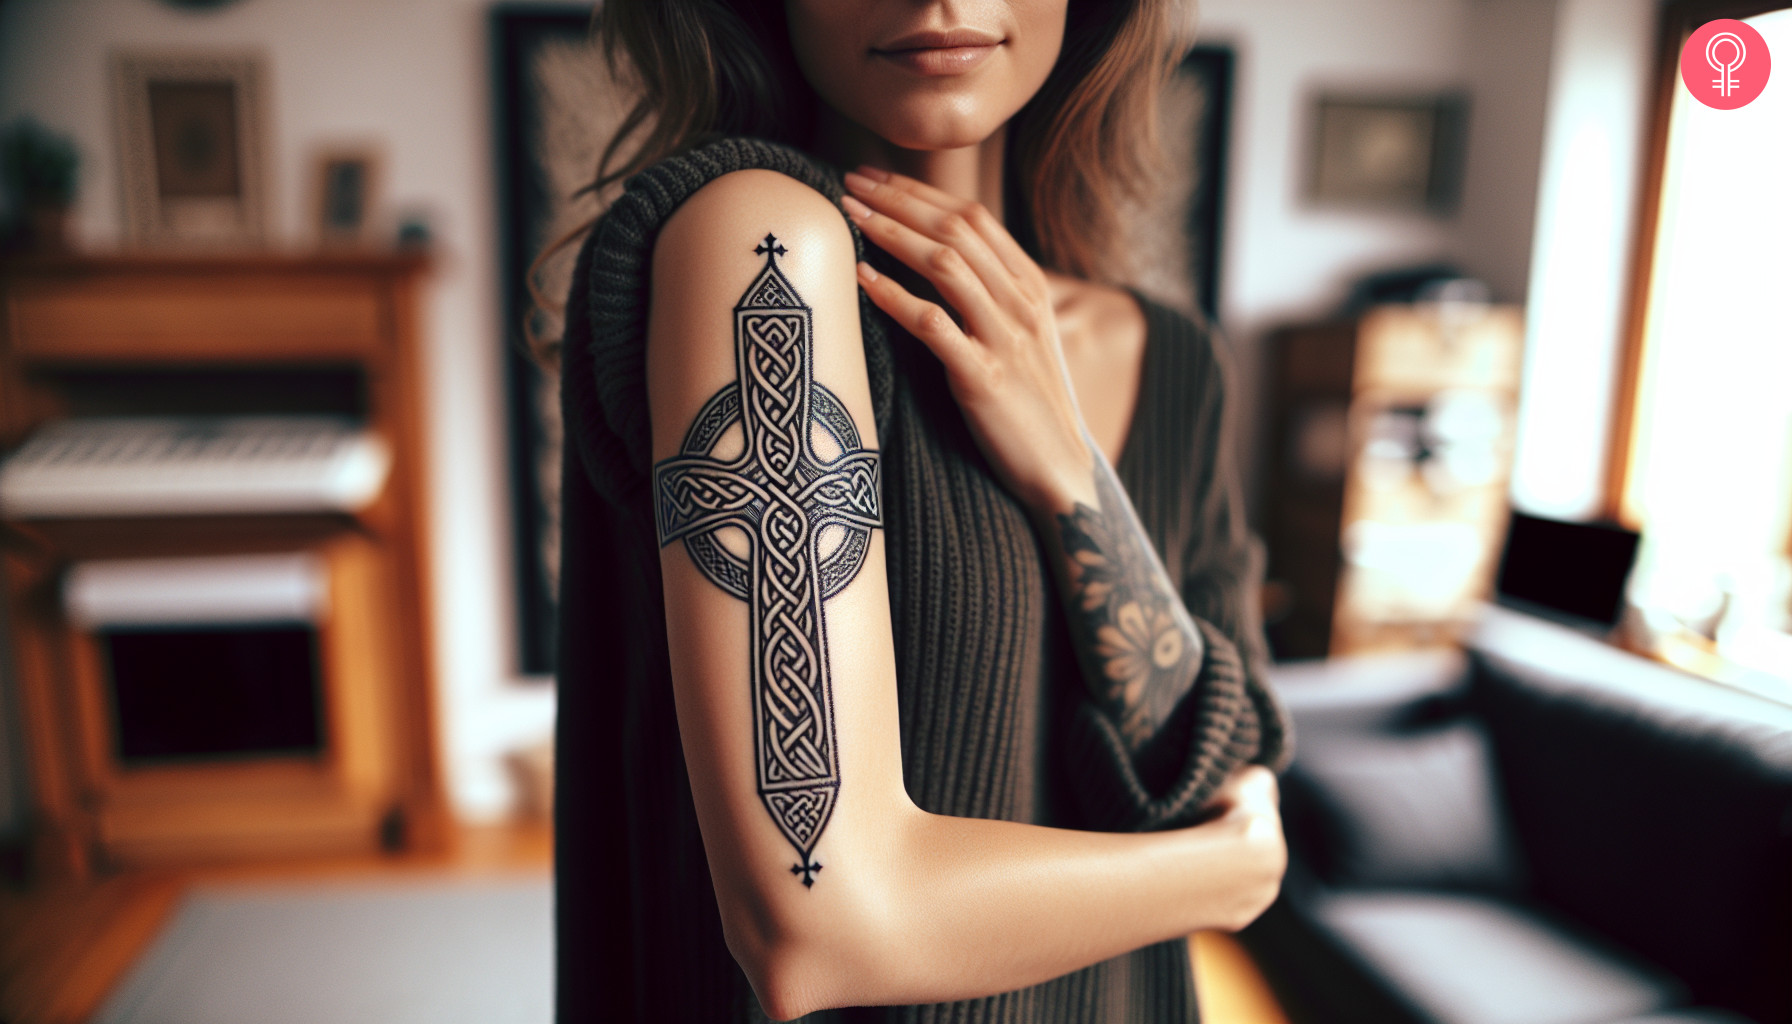 Celtic cross with trinity knot tattoo on the upper arm of a woman